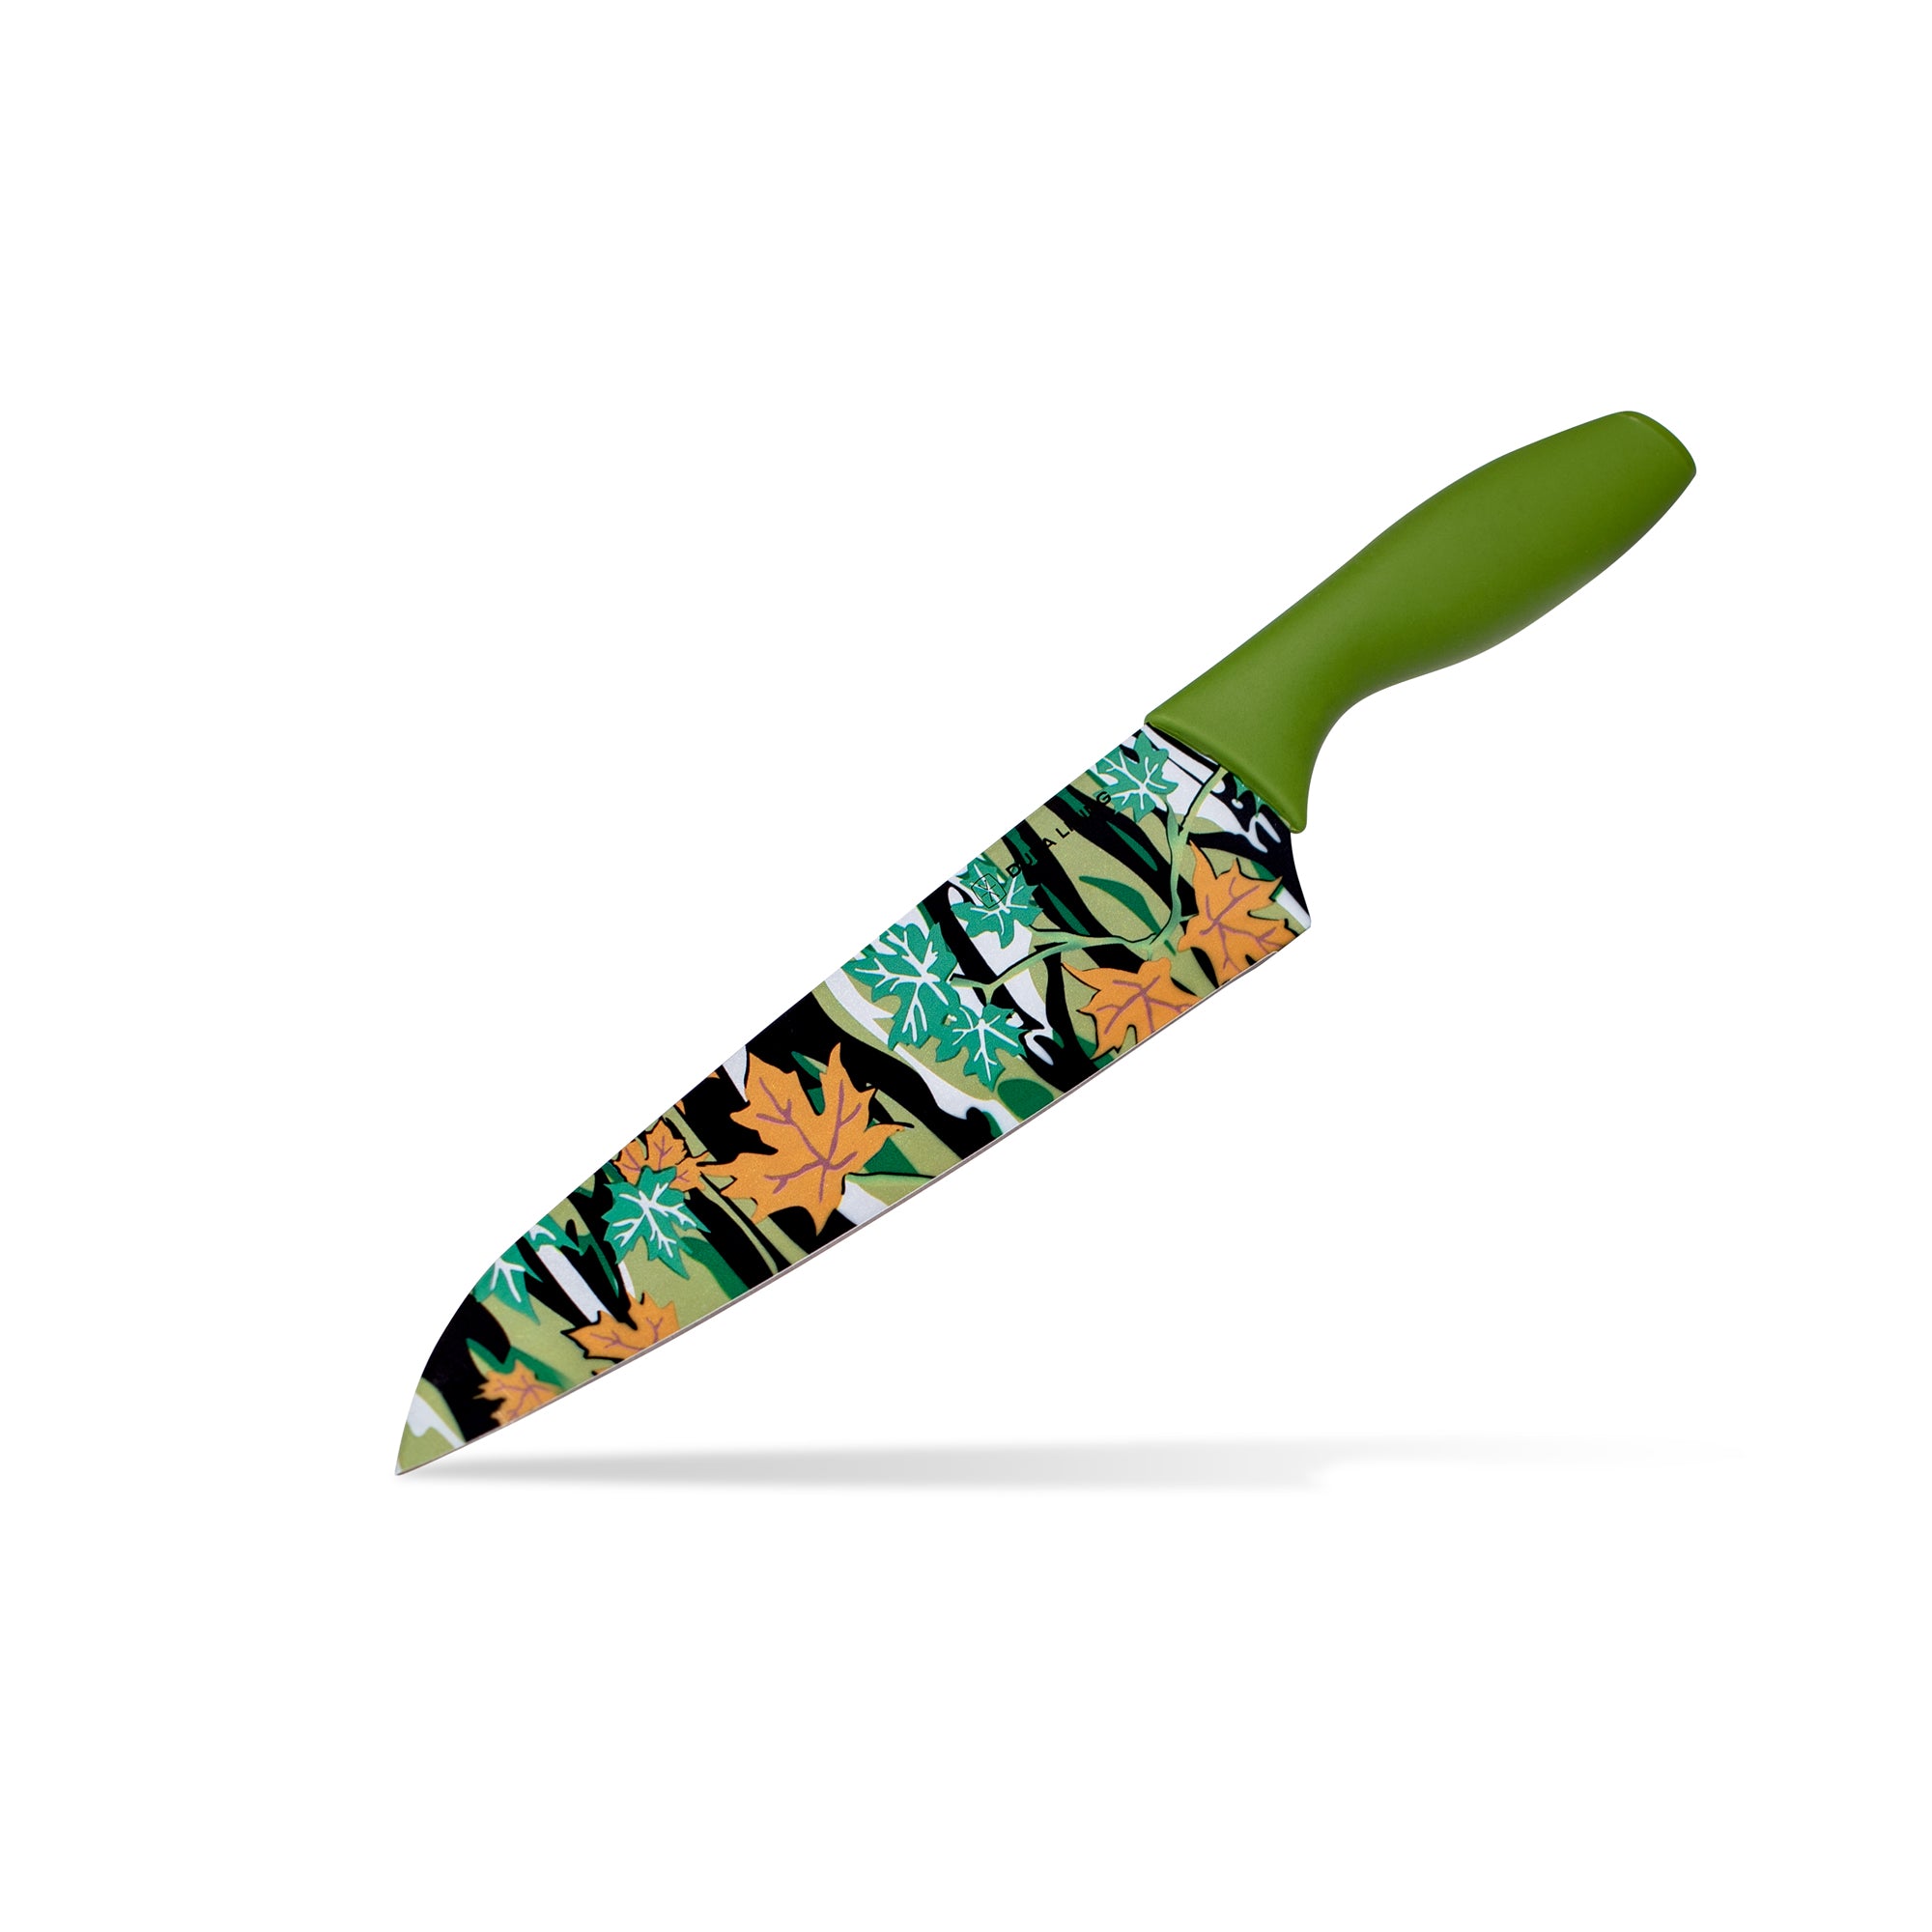 Printed Kitchen Knife - Stainless Steel - Green - Blue - Red